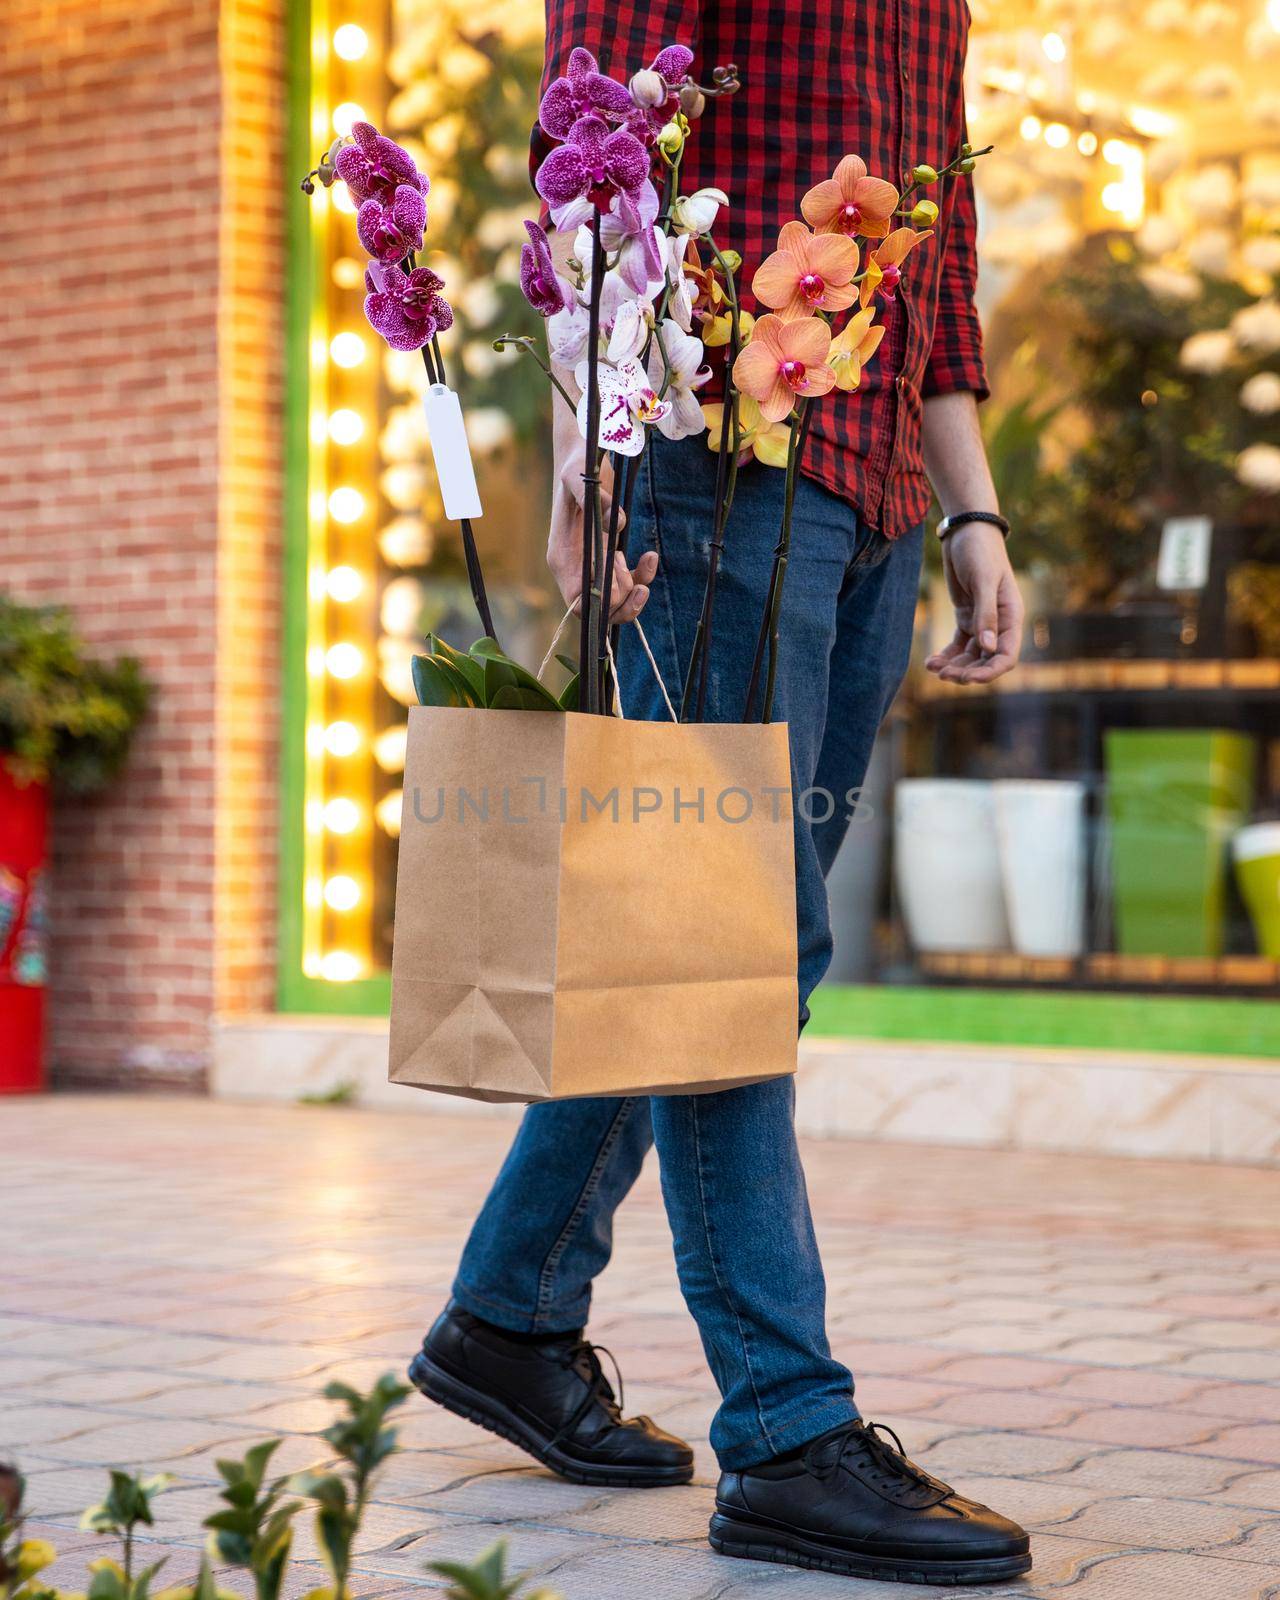 Man walking with shopping bag inside Moth orchids Phalaenopsis